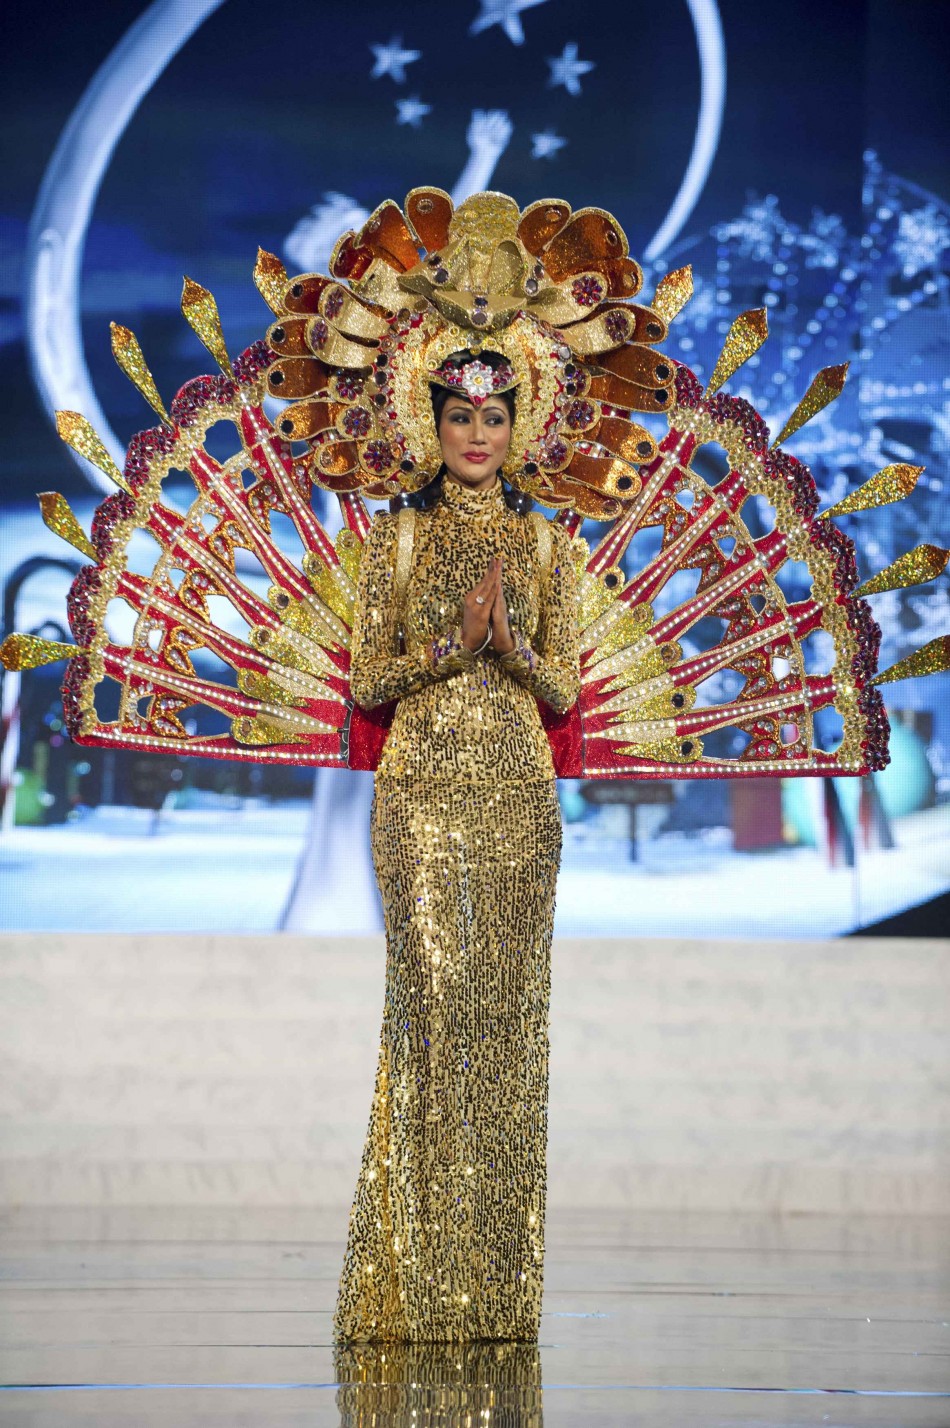 Miss Sri Lanka Sabrina Herft on stage at the 2012 Miss Universe National Costume Show at PH Live in Las Vegas